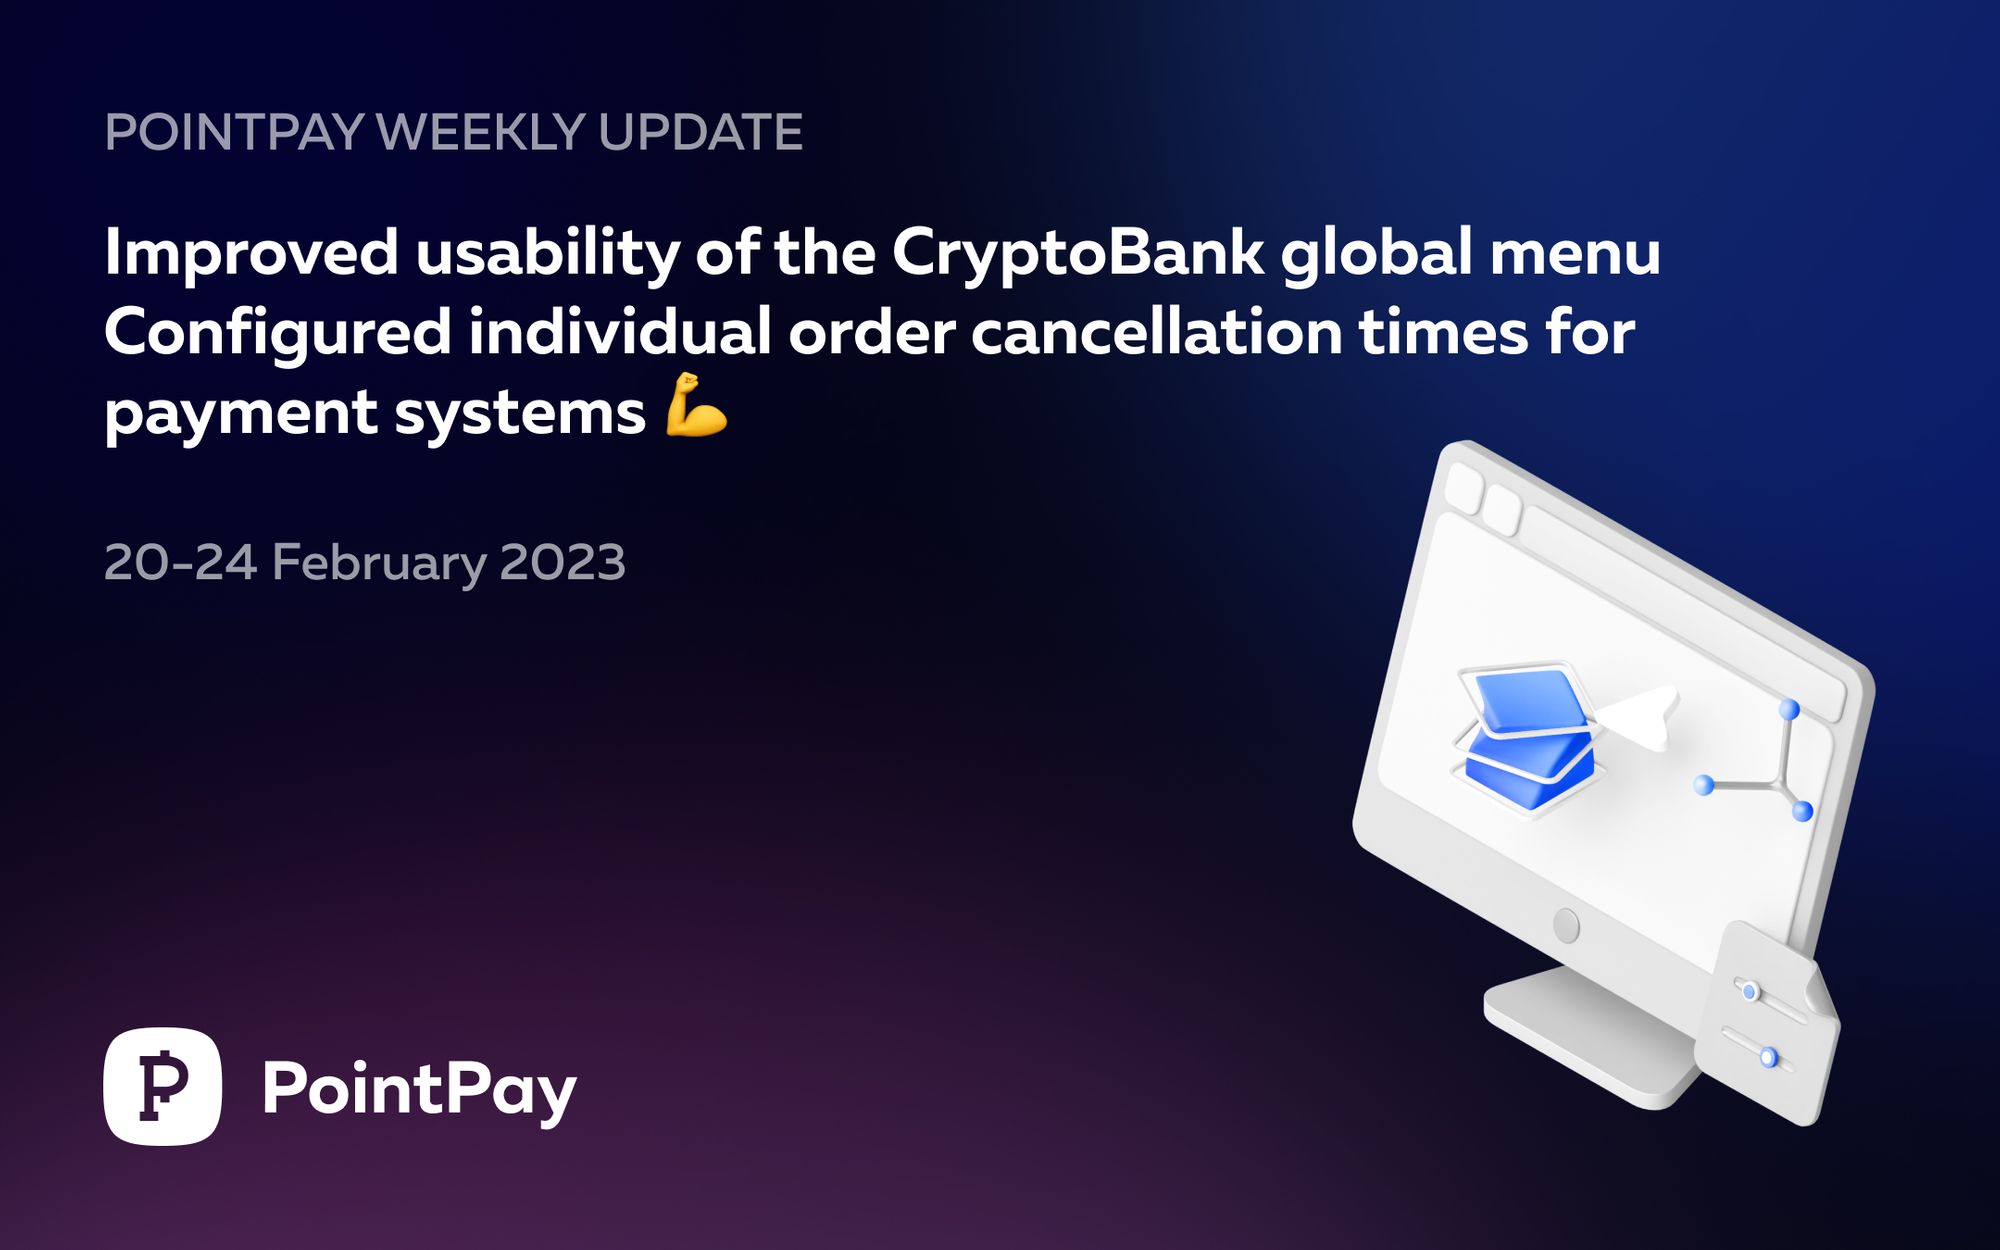 PointPay Weekly Update (20 - 24 February 2023)